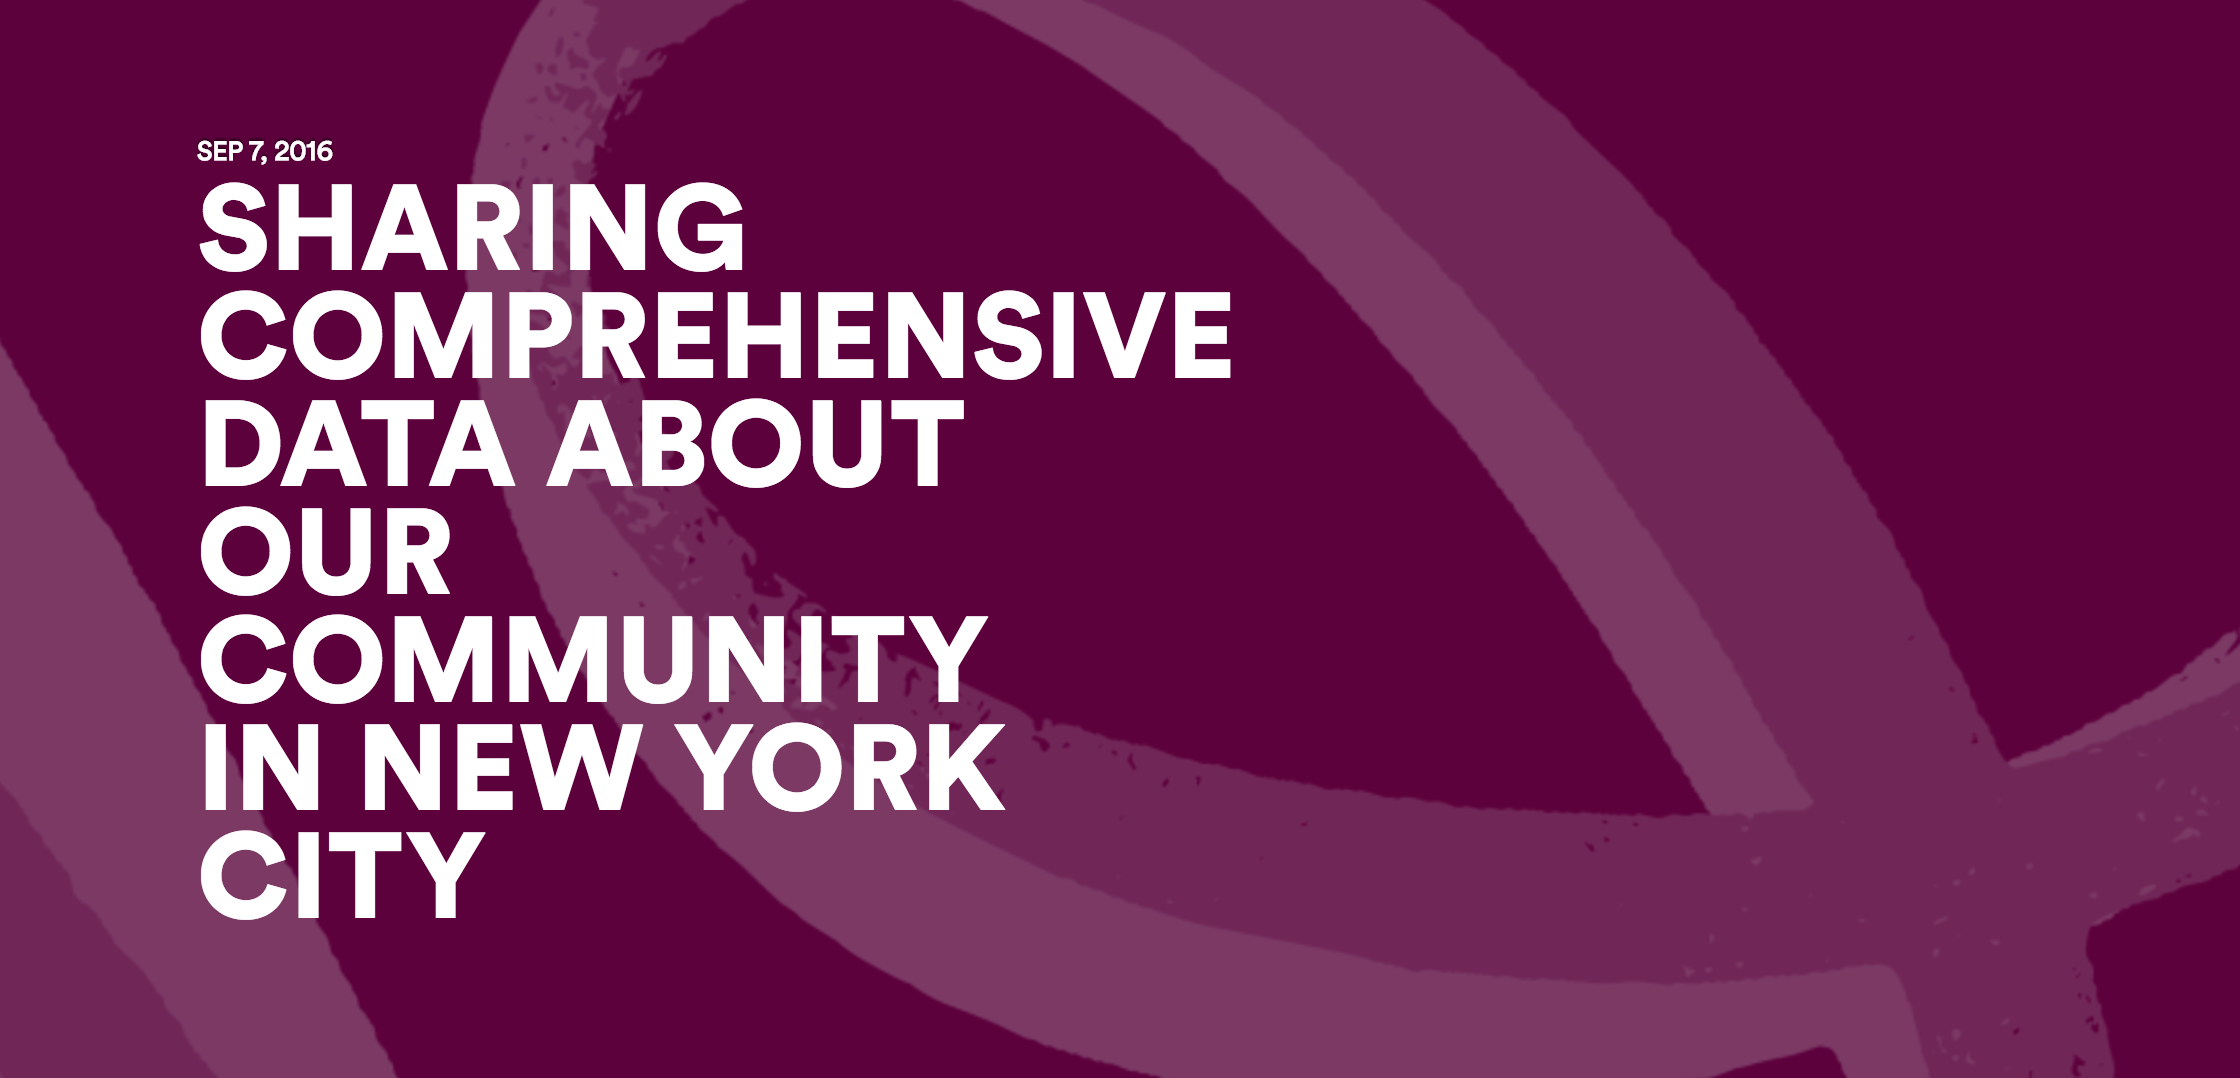 airbnb_action___sharing_comprehensive_data_about_our_community_in_new_york_city